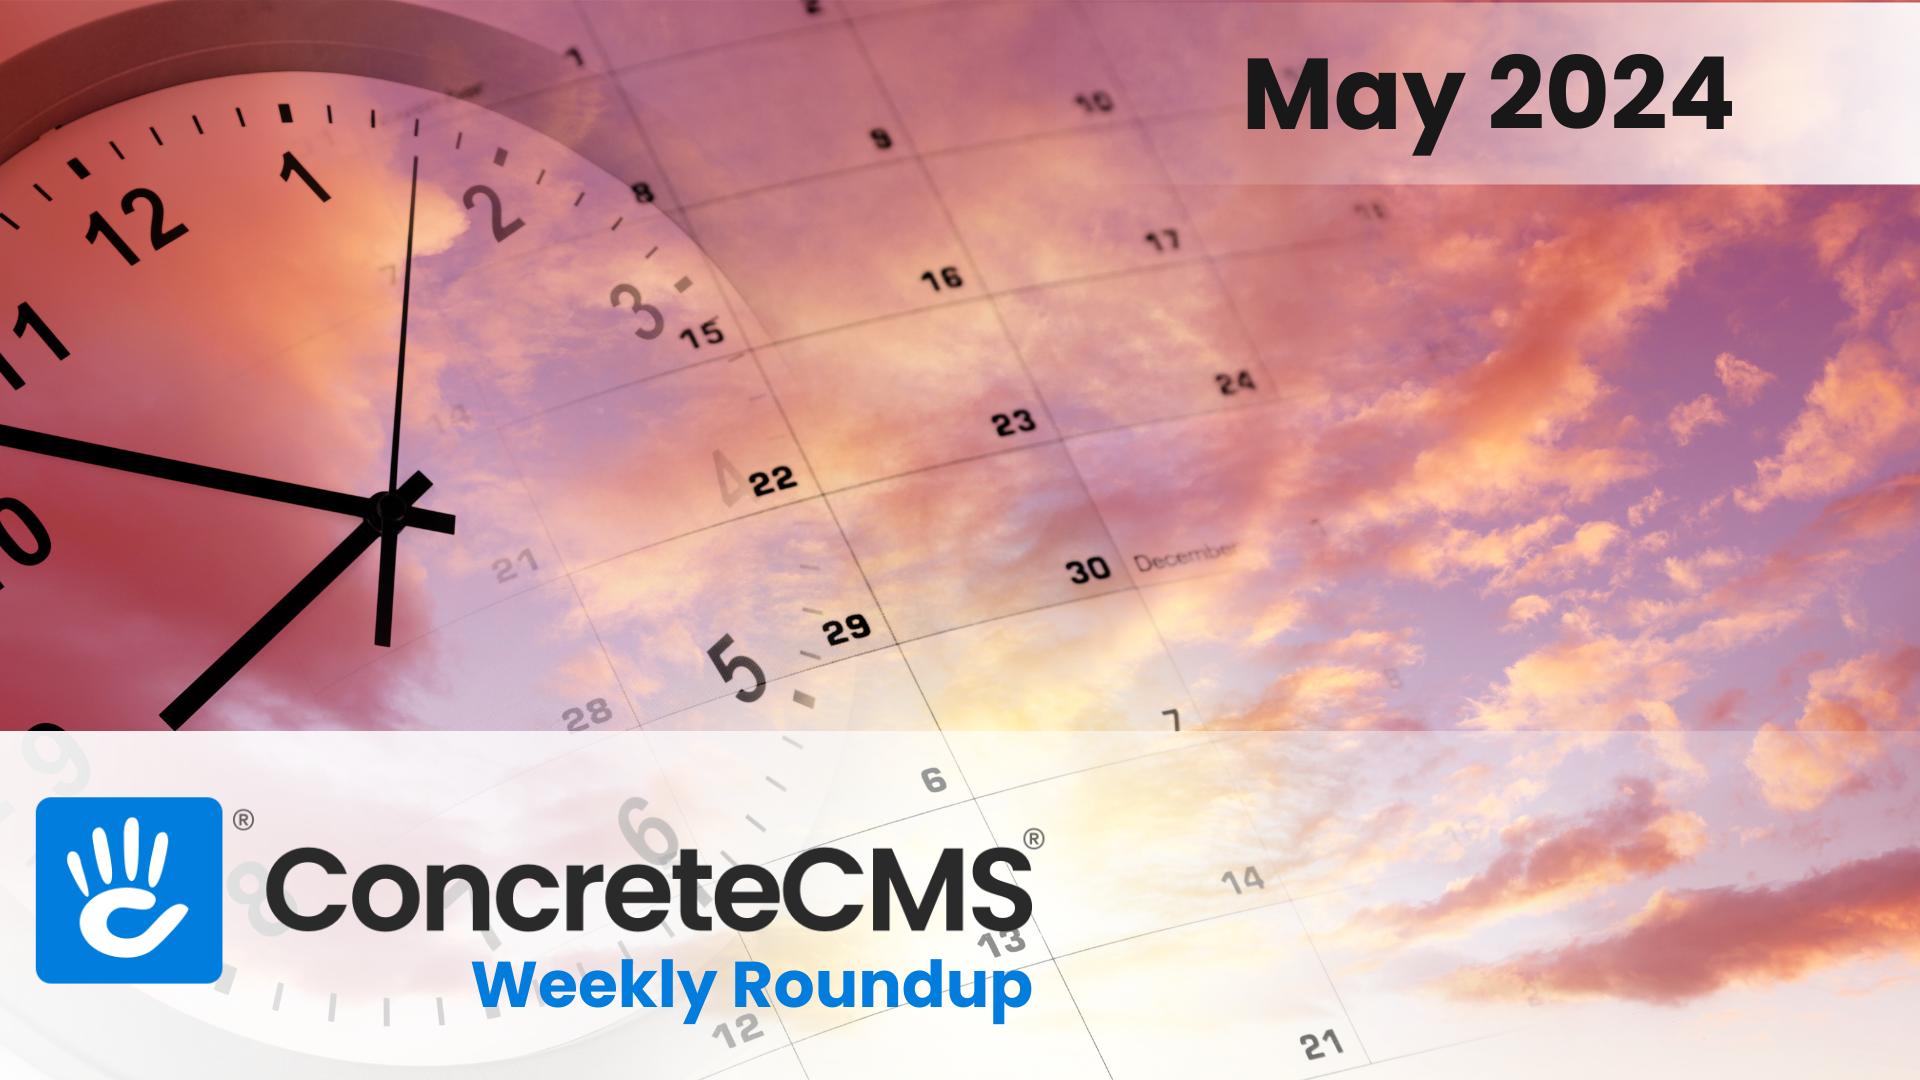 Town Hall Roundup: Concrete CMS Updates and Exciting Changes